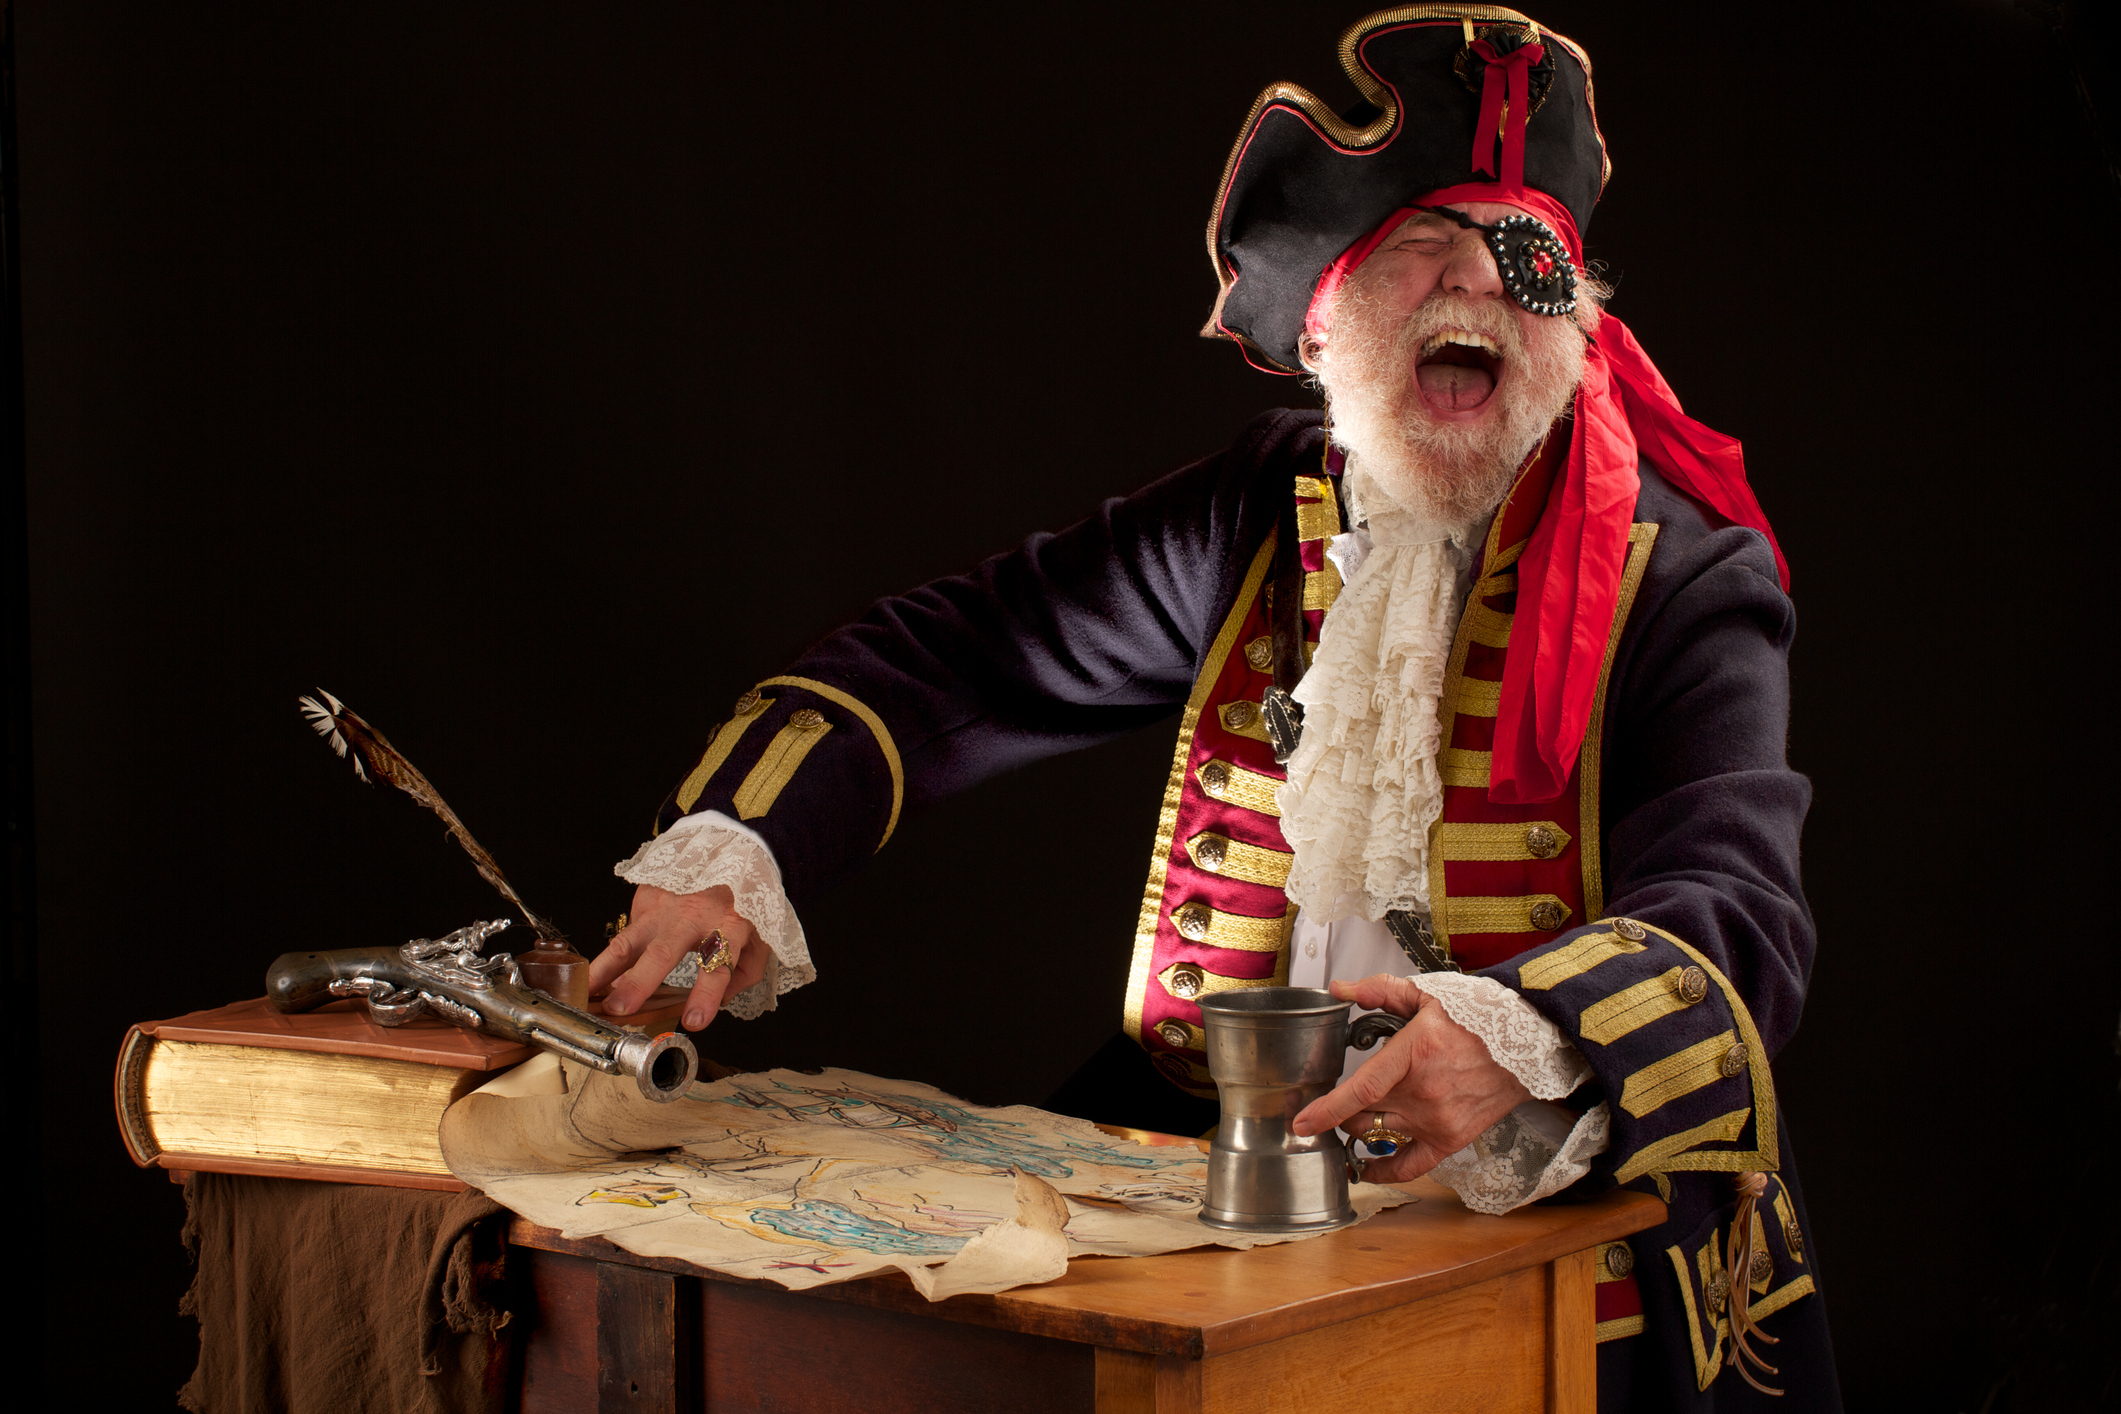 Person dressed as a pirate with a feathered hat, gesturing dramatically at a desk with a map, quill, and pistol